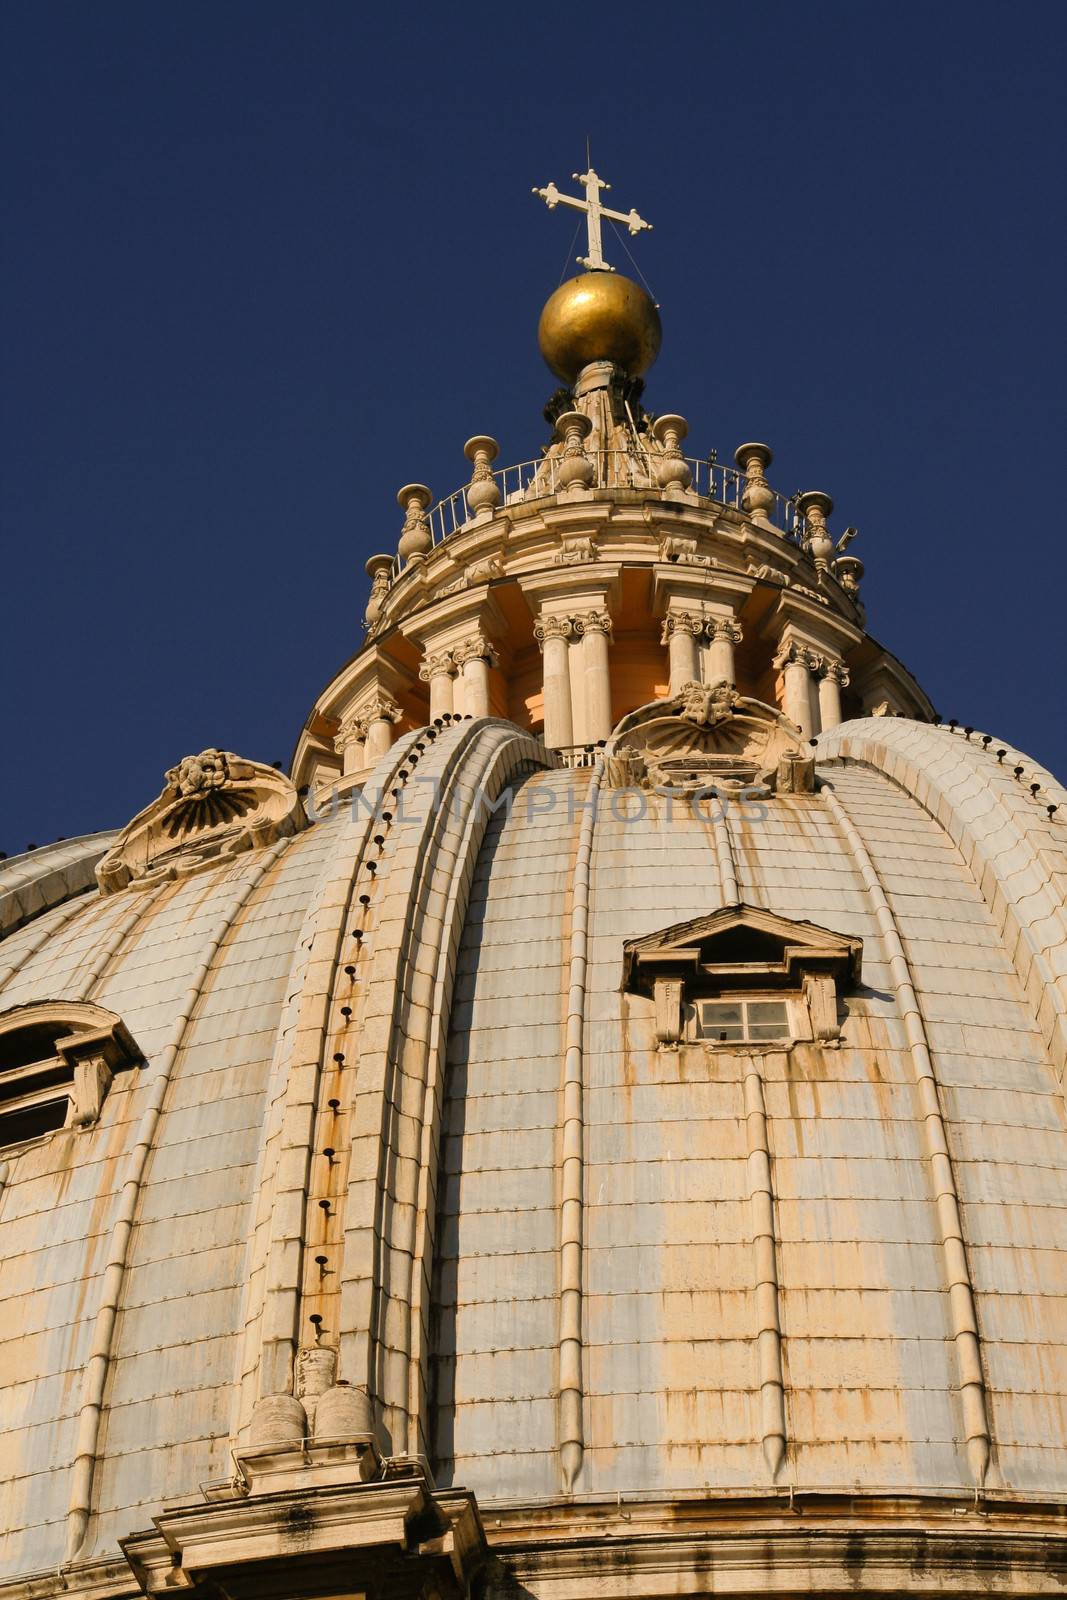 the dome of a St. Peter's Basilica by CelsoDiniz